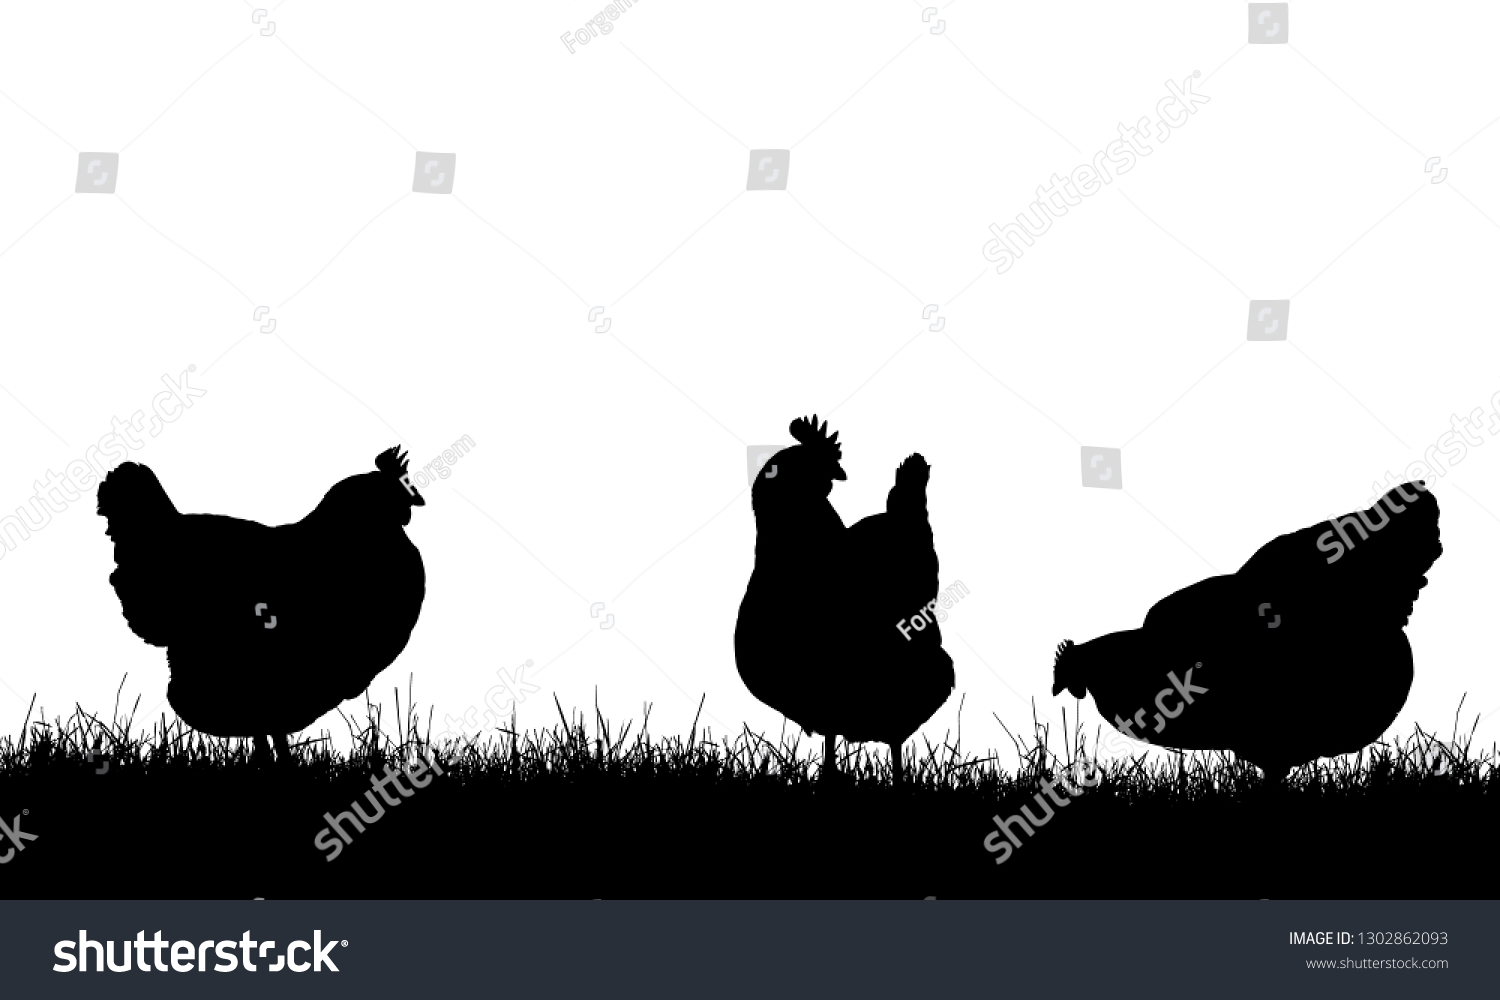 Realistic Illustration Three Silhouettes Hens On Stock Vector Royalty Free 1302862093 